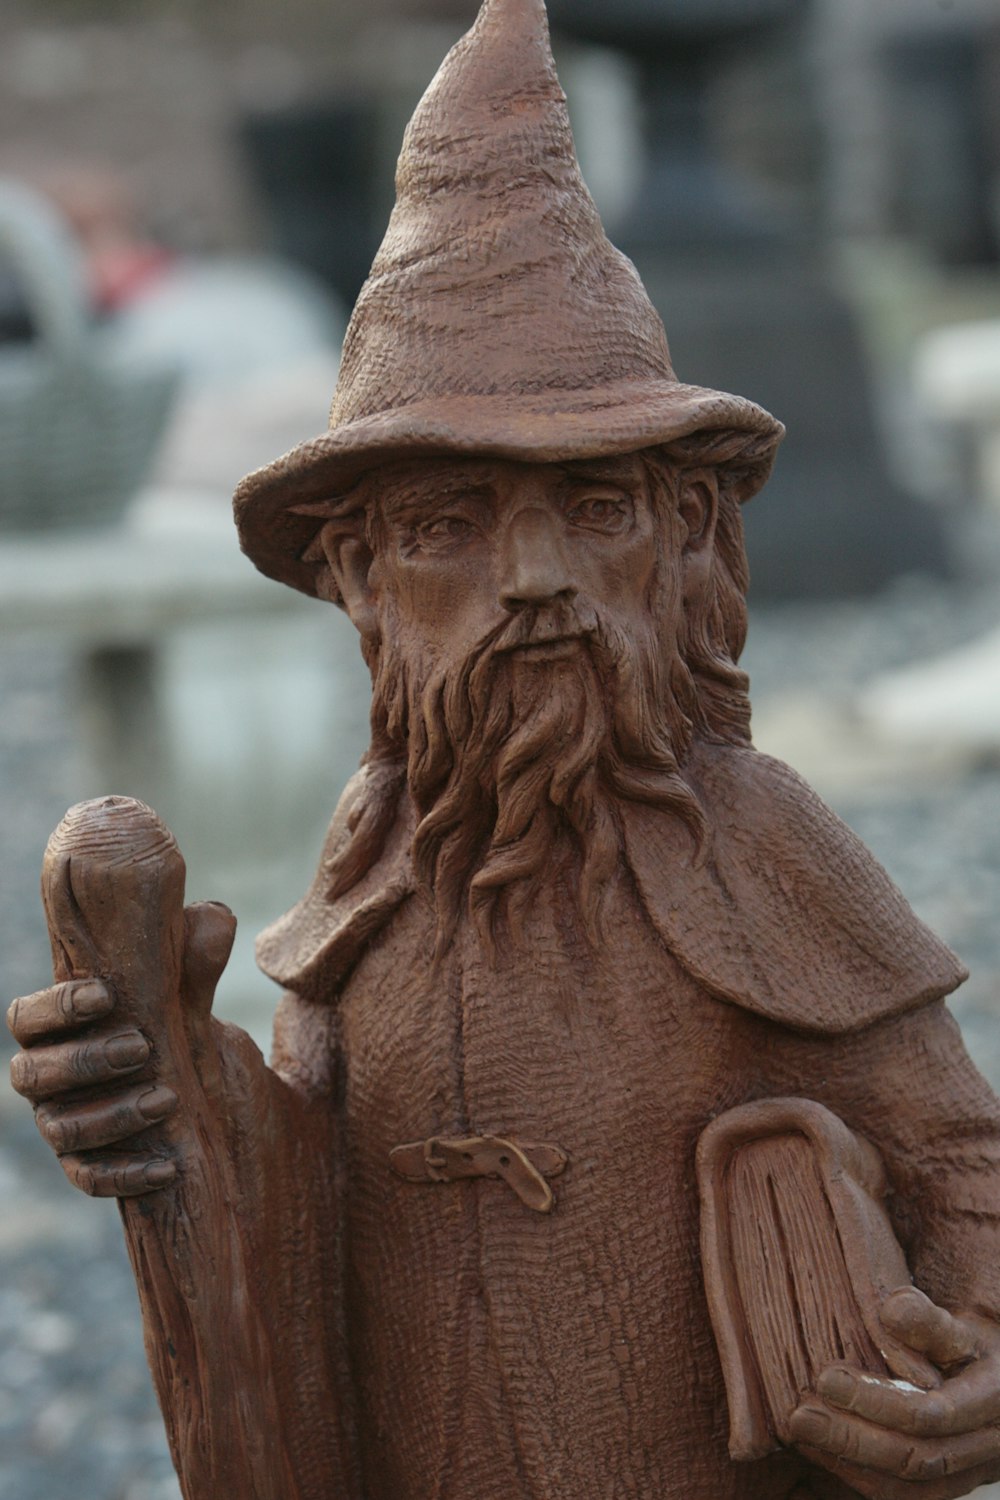 a statue of a man with a hat and a cane